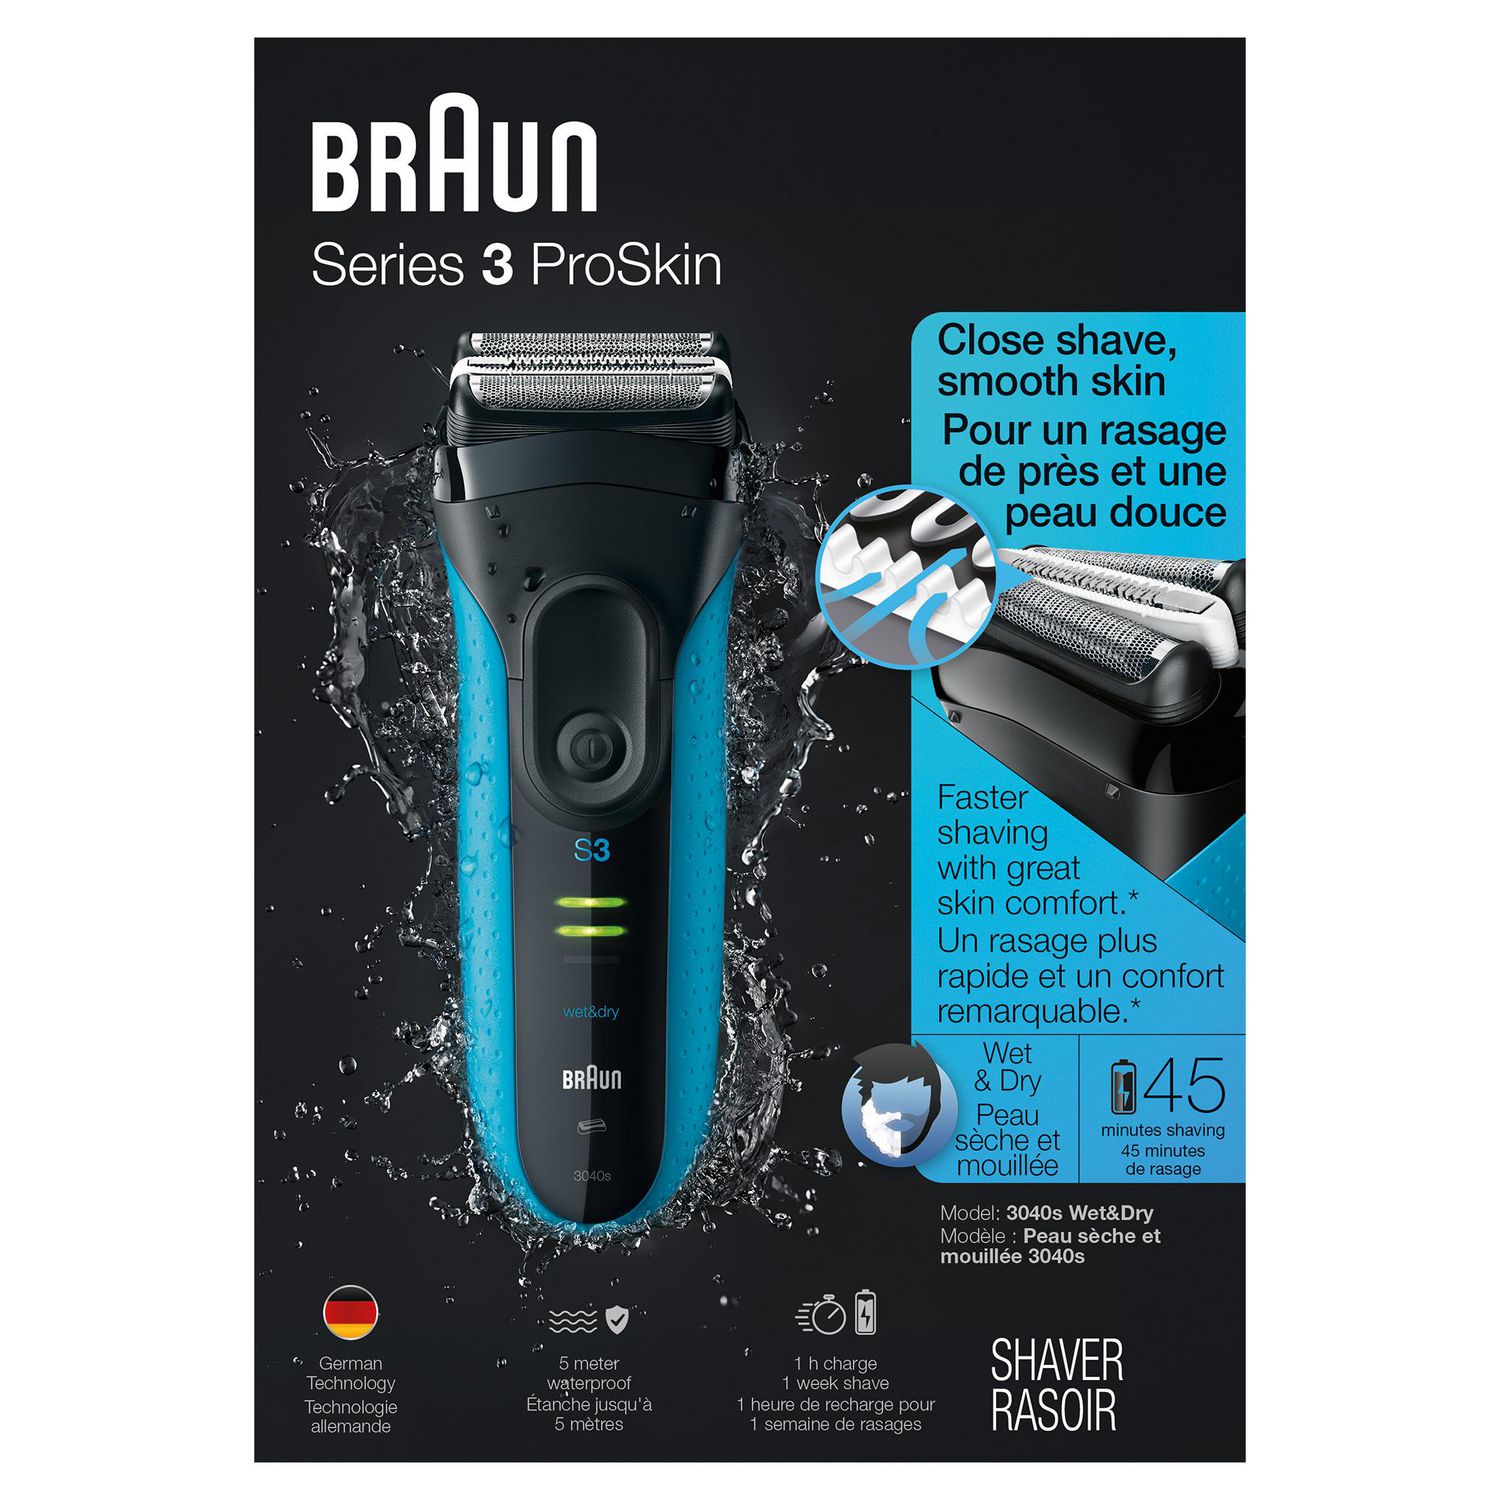 Braun Series 3 Proskin for Men, Wet Electric 3-in-1 Set 1 Shave&Style Shaver, Dry Black/Blue, Razor and